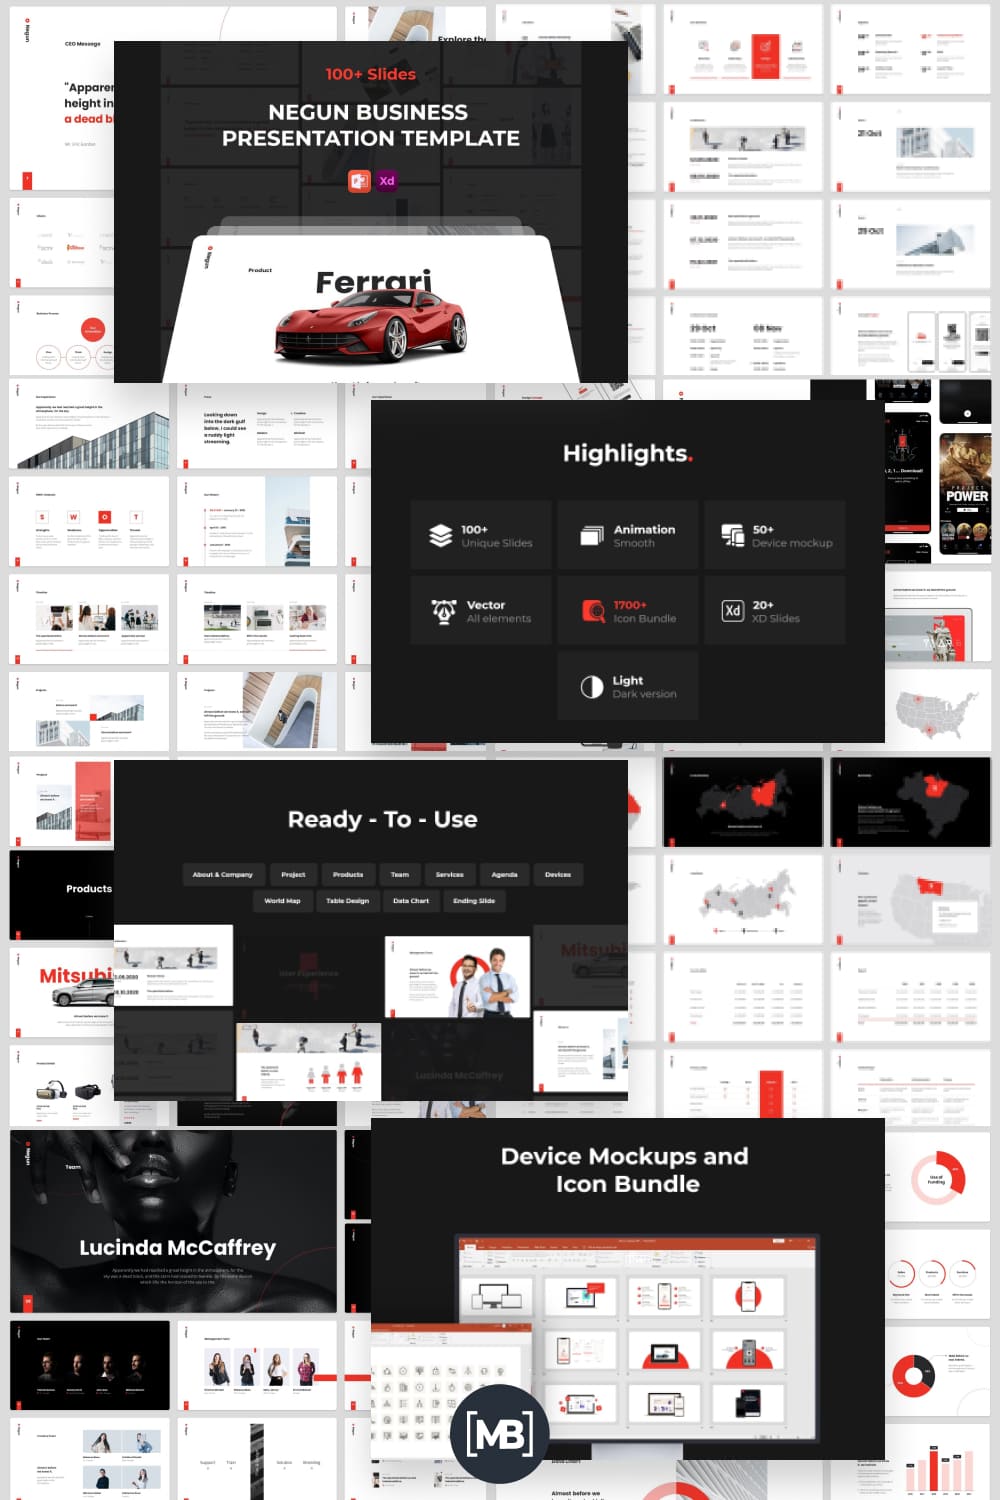 45+ Best PowerPoint templates with animation for 2021 - MasterBundles